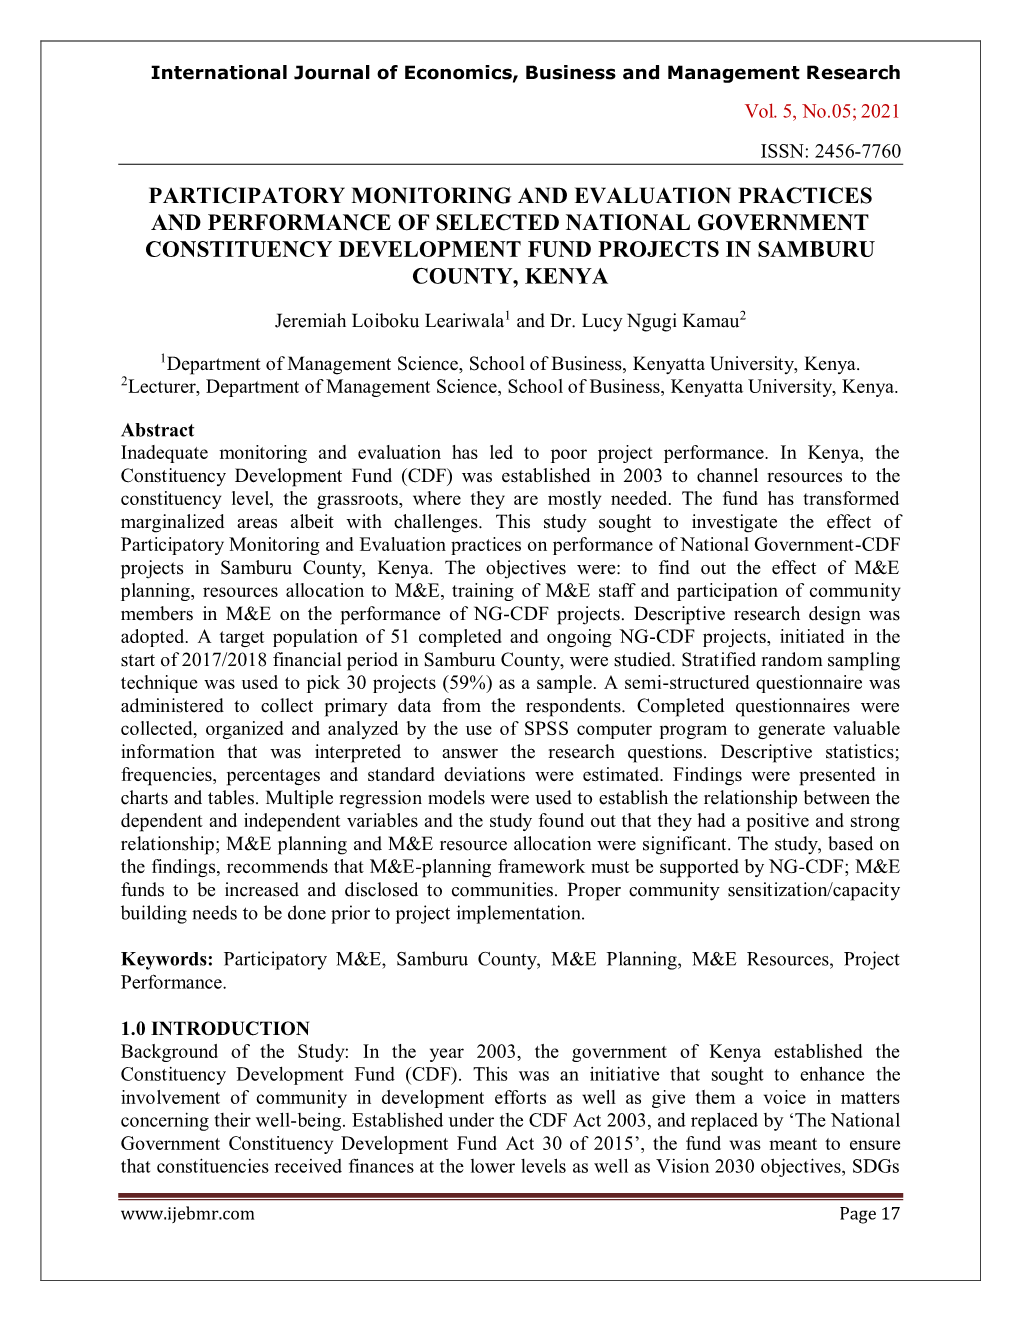 Participatory Monitoring and Evaluation Practices and Performance of Selected National Government Constituency Development Fund Projects in Samburu County, Kenya